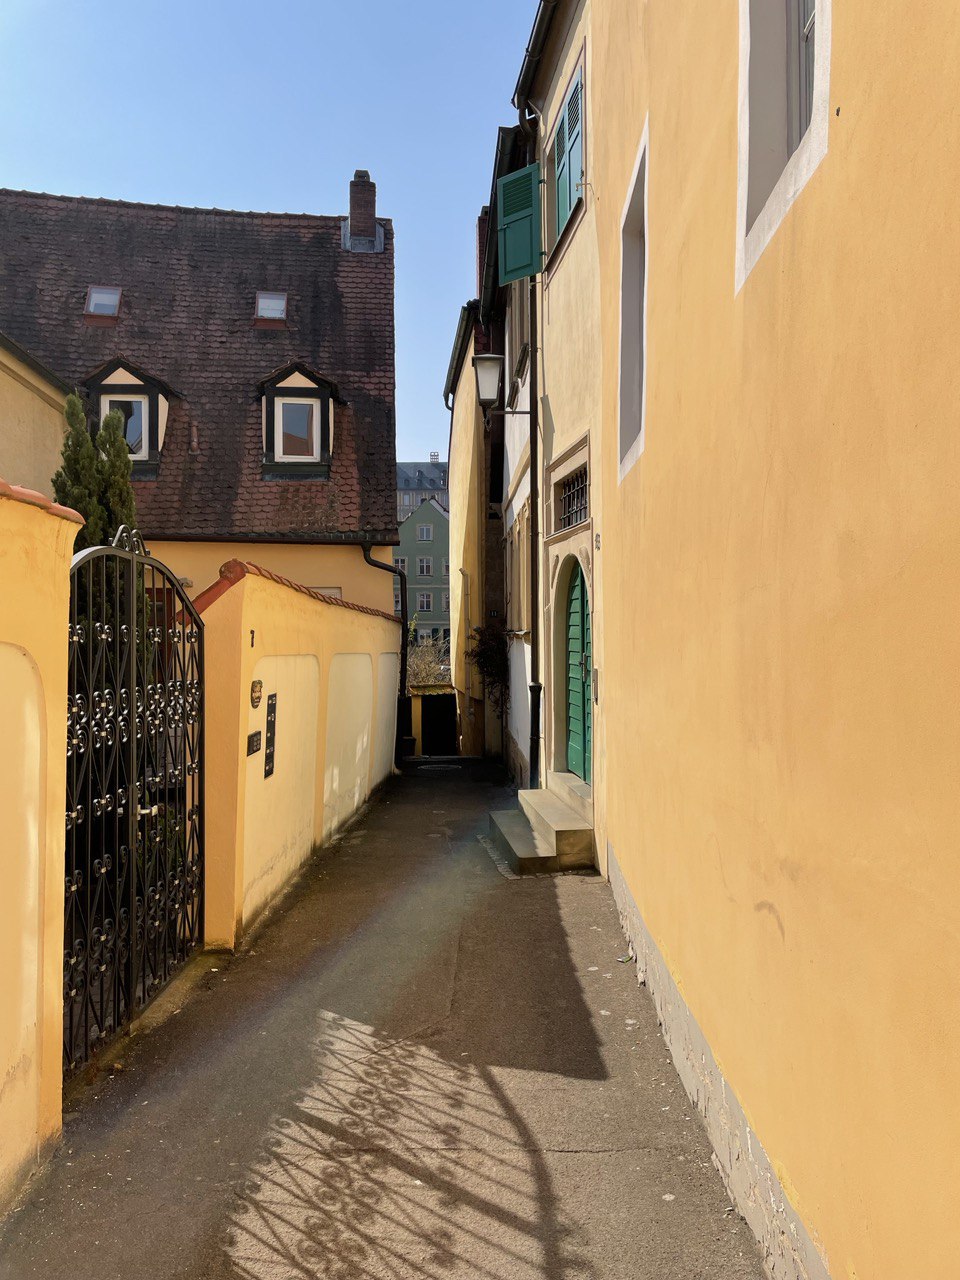 A tiny alleyway in the UNESCO world heritage area